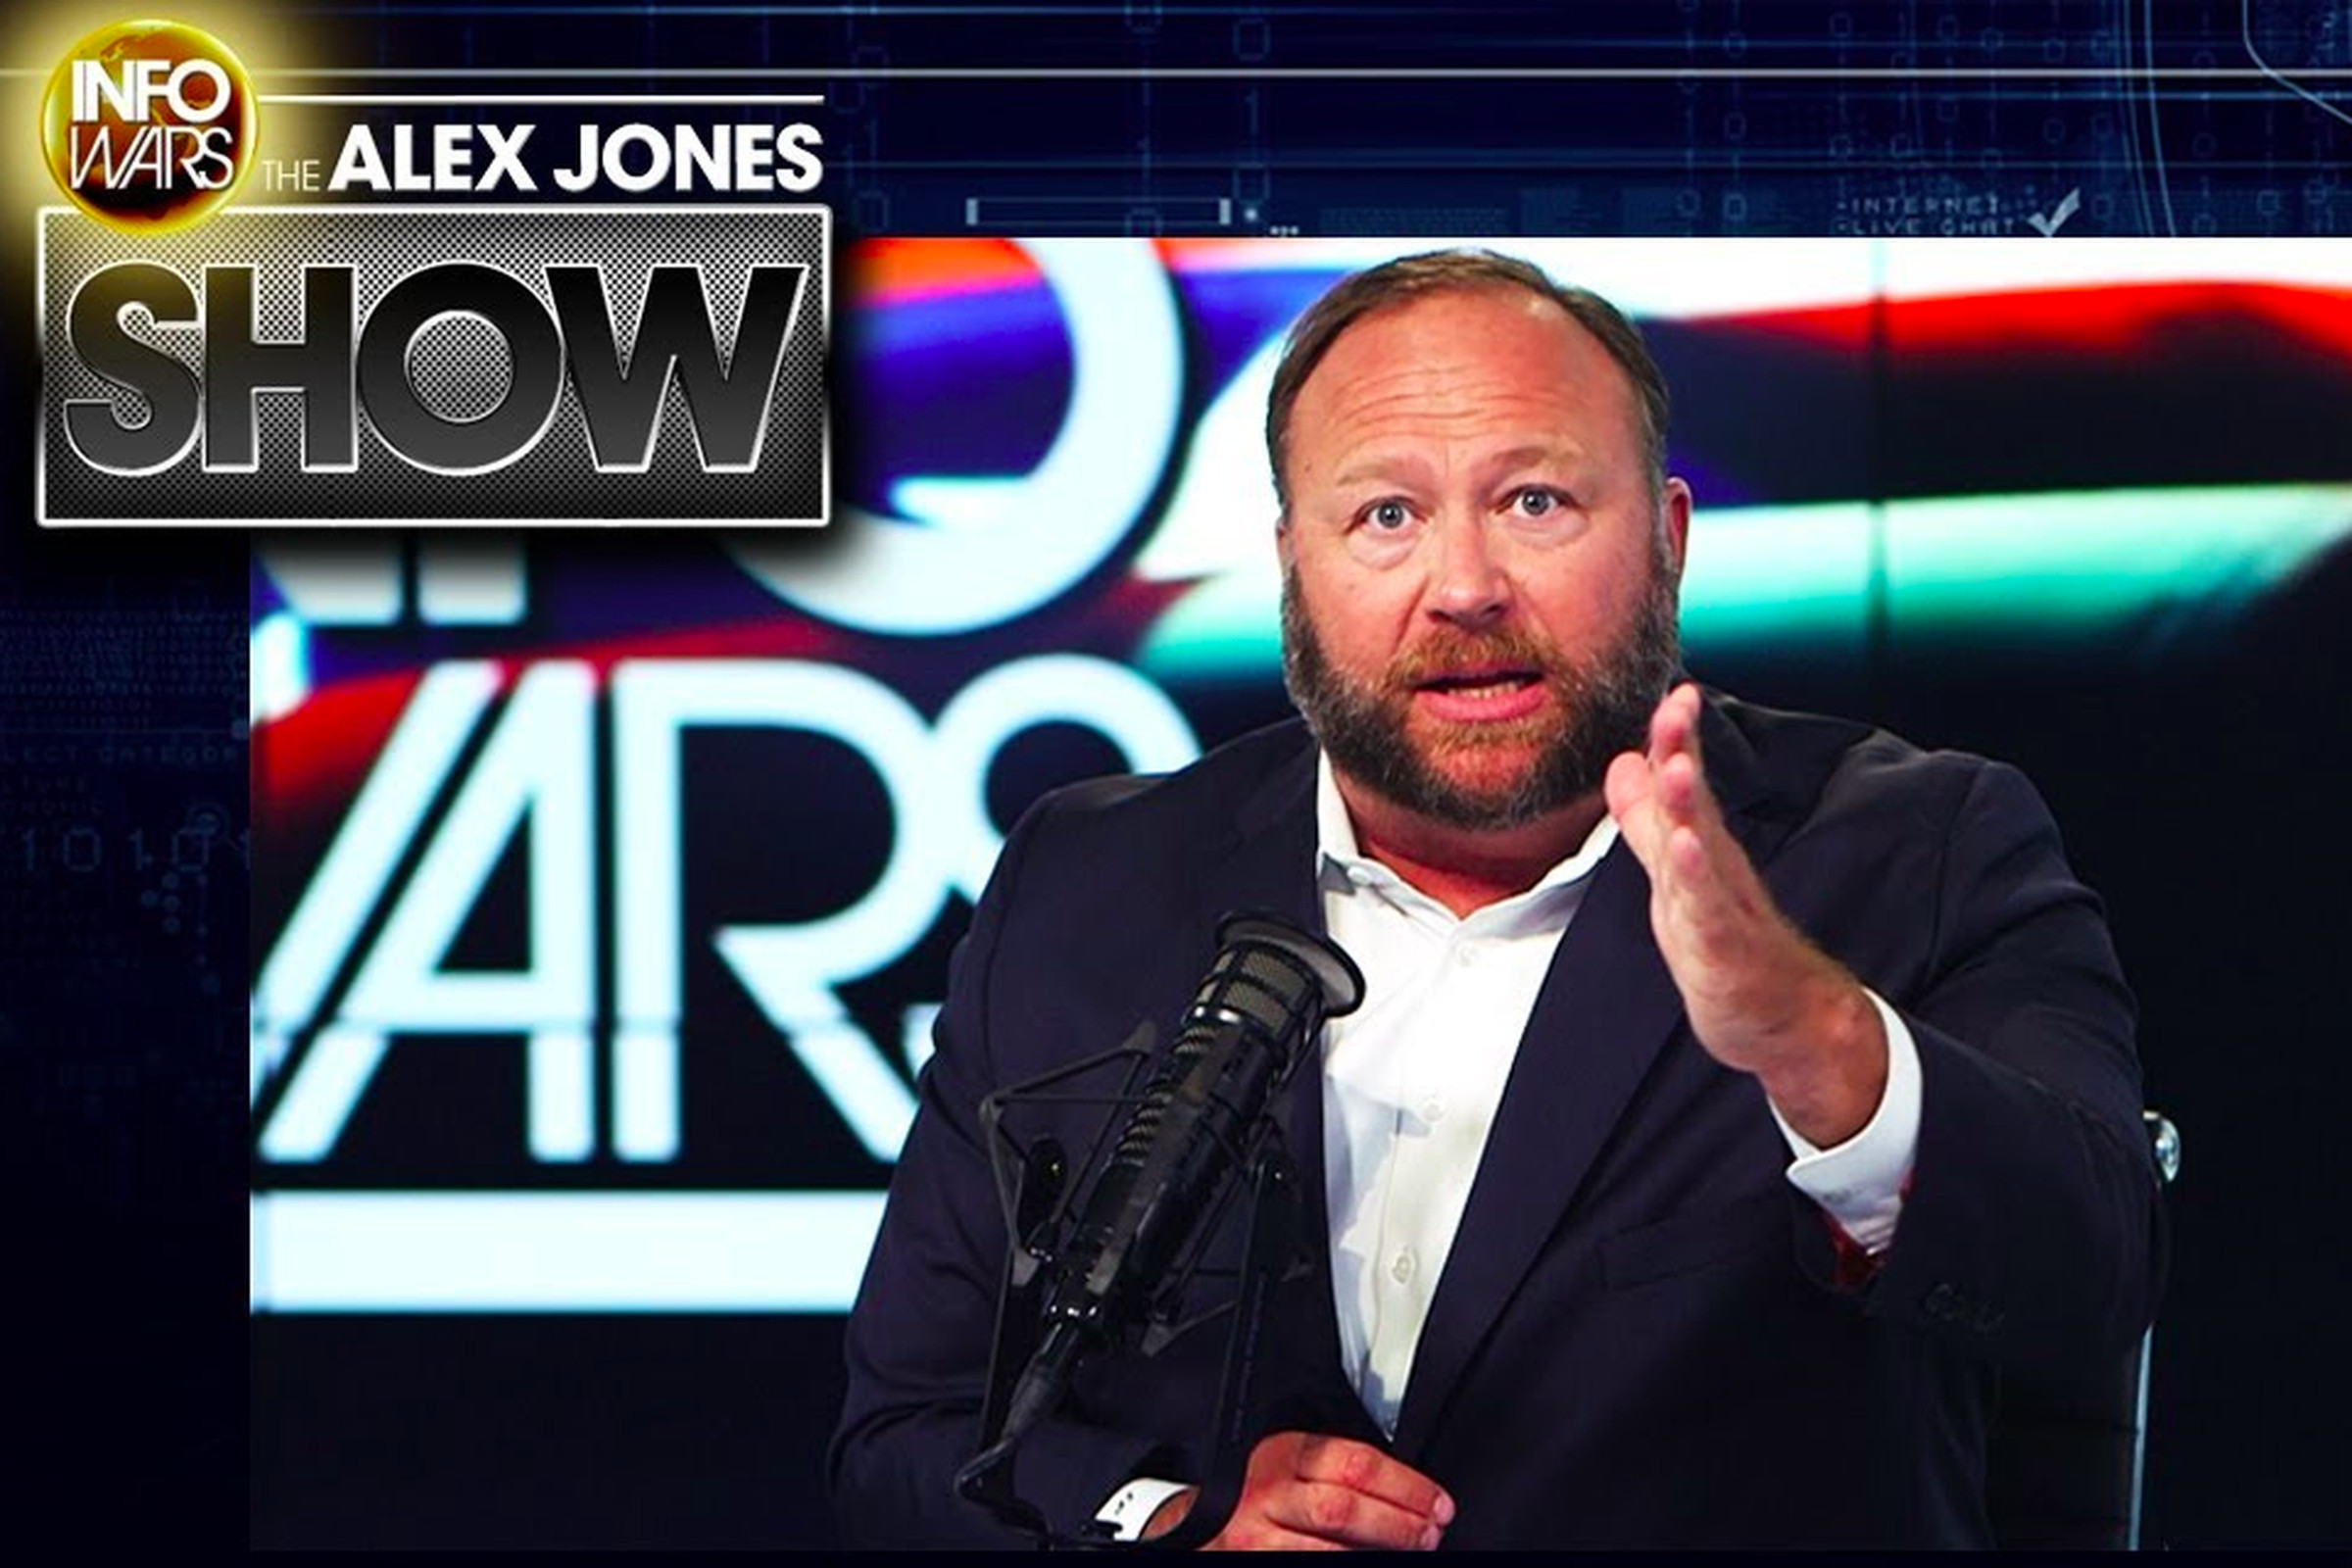 Alex Jones’ personal page was suspended for violating the site’s community guidelines.